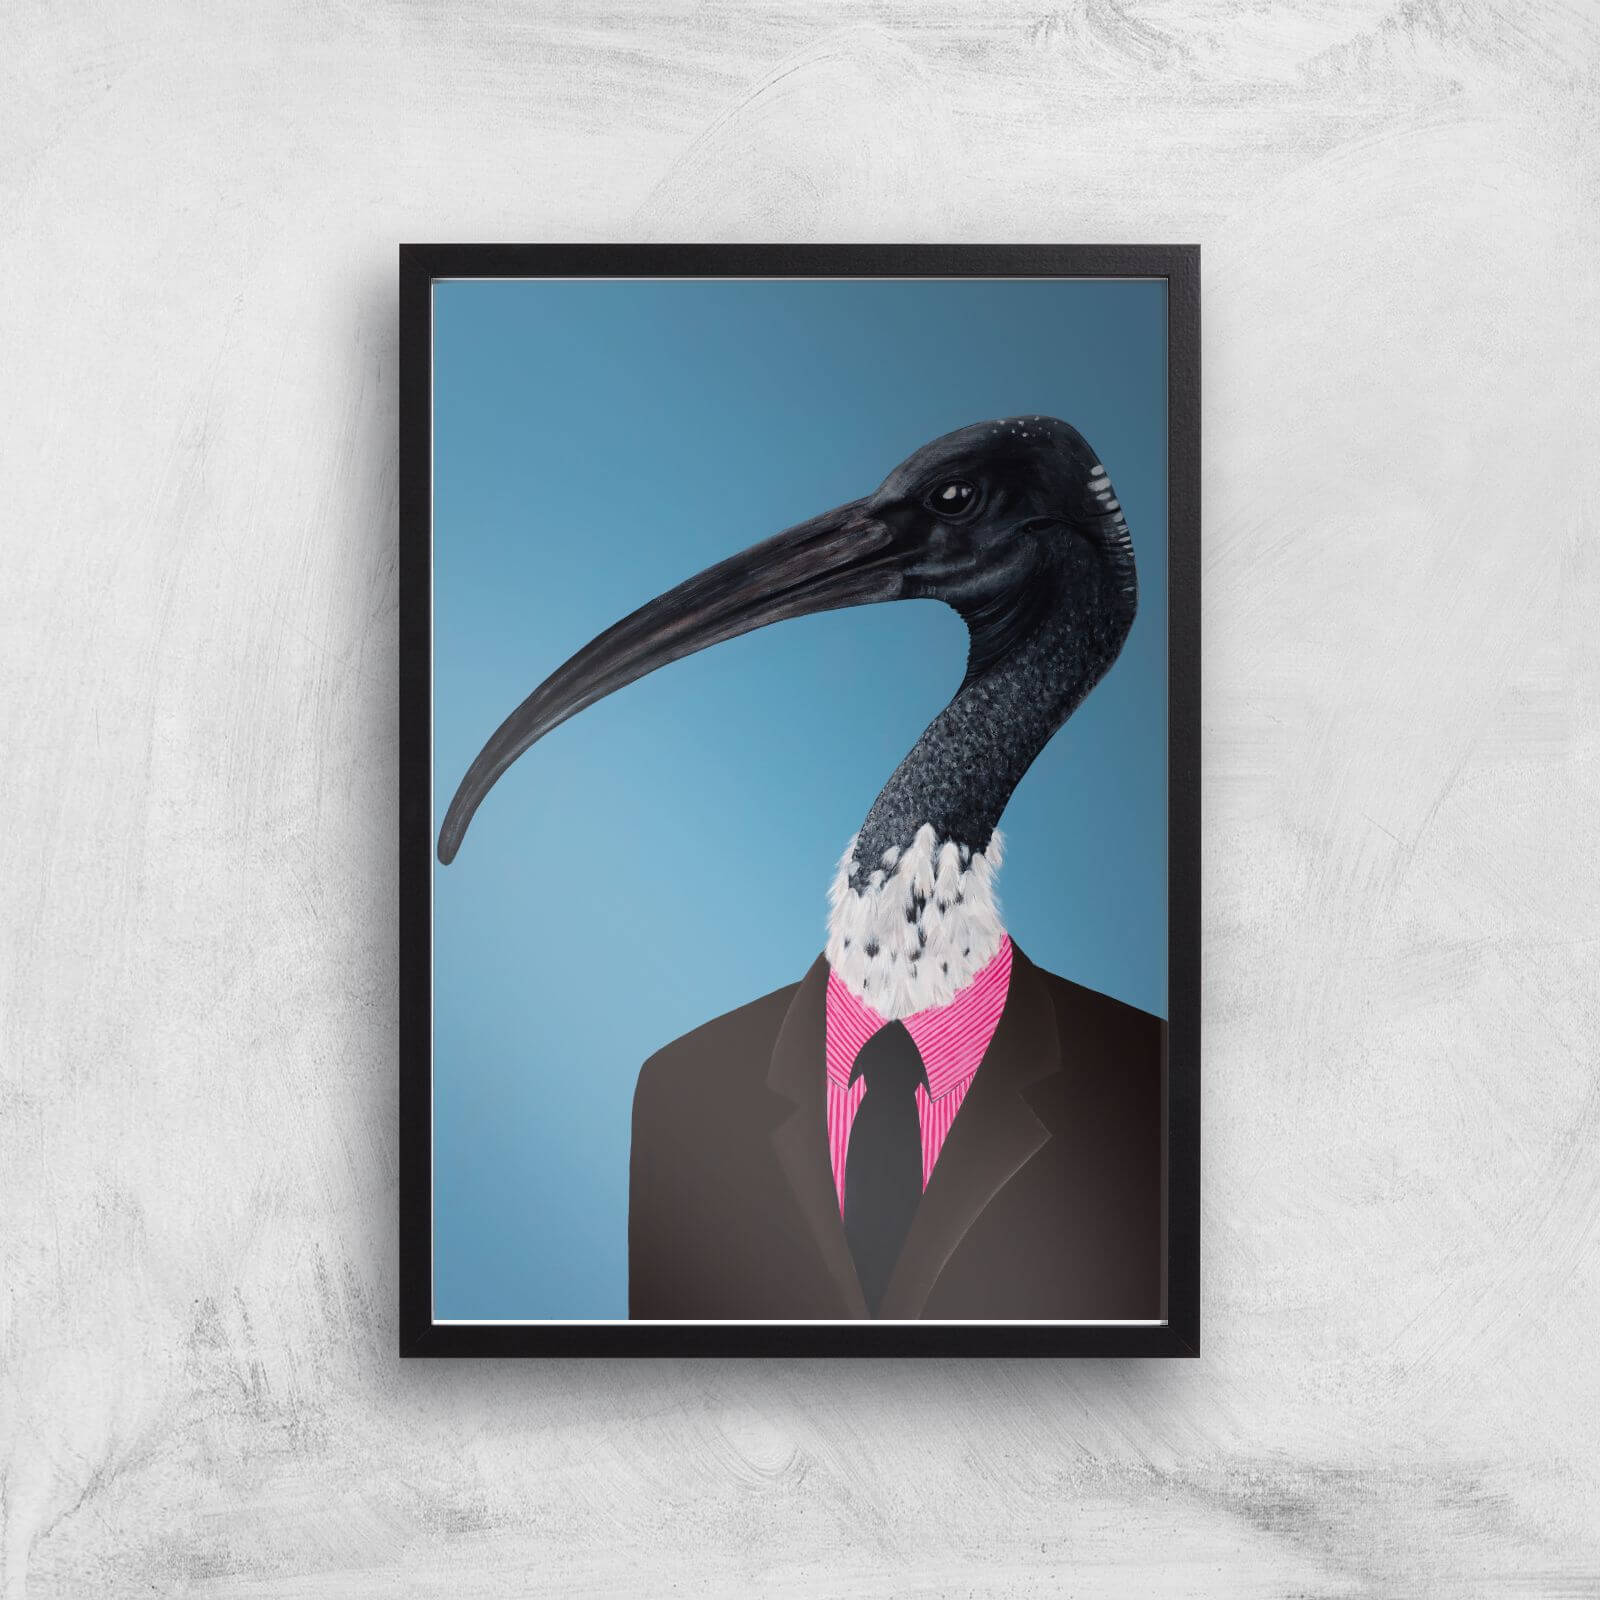 Ibis In Suit Giclee Art Print - A2 - Black Frame